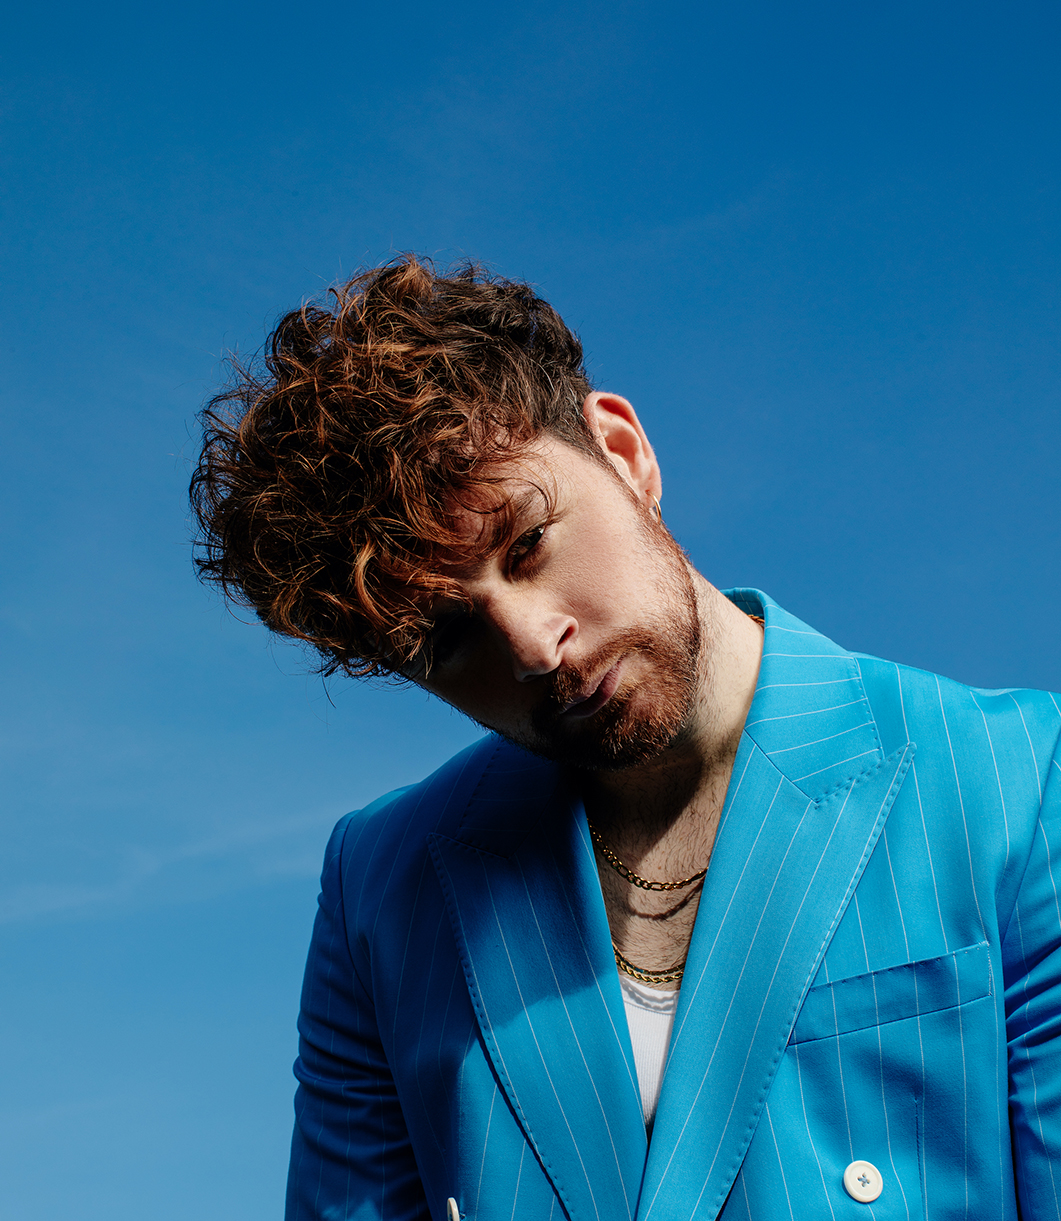 TOM GRENNAN shares new single 'Little Bit Of Love' ahead of new album 'Evering Road' due March 5th 